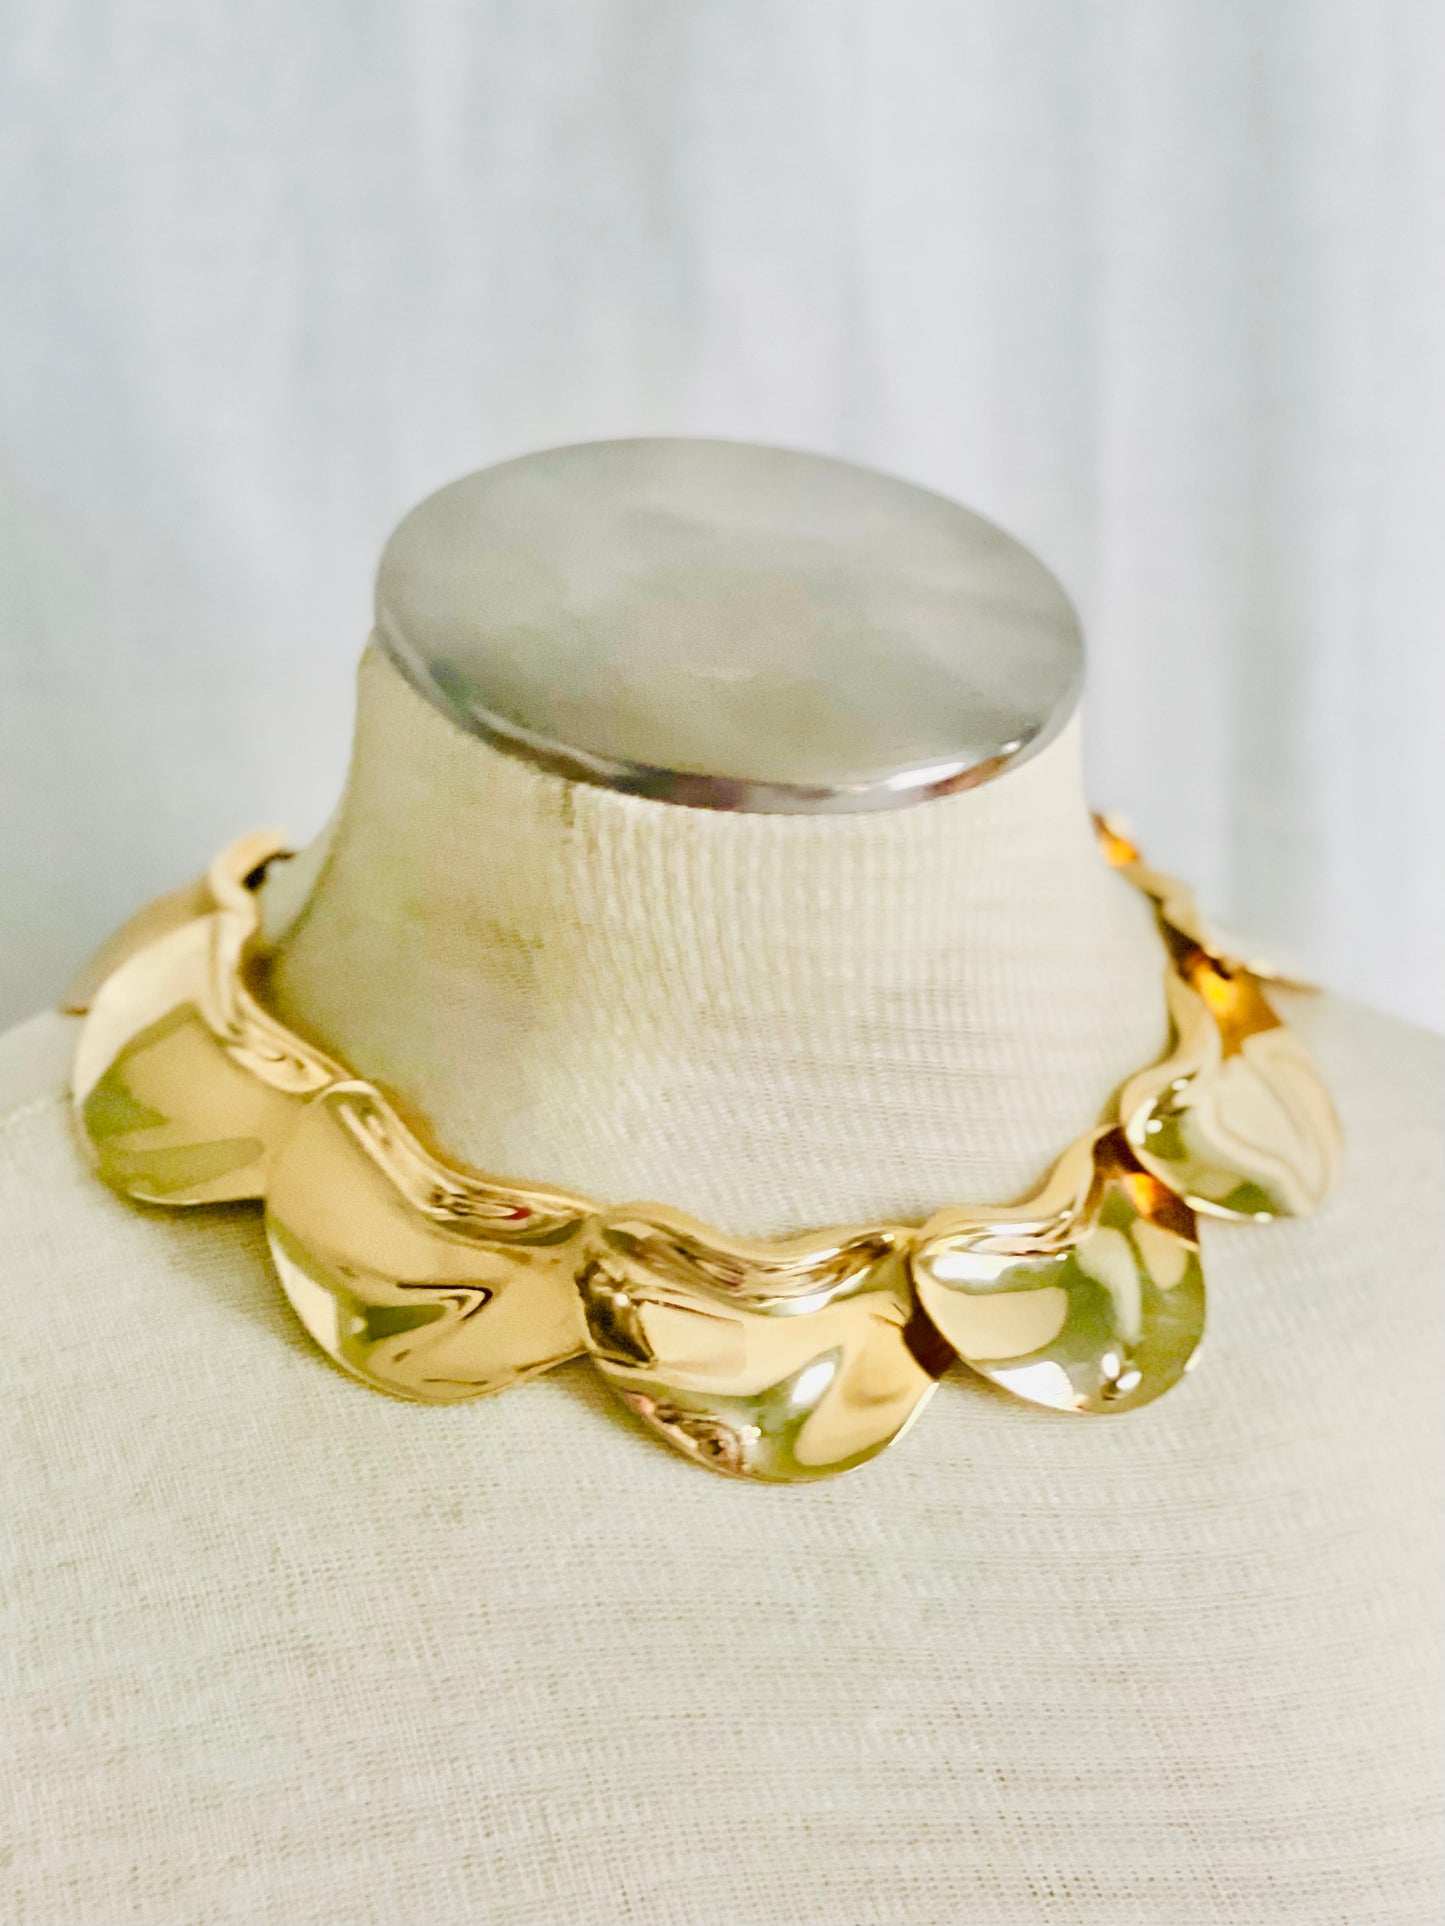 Vintage Gold Tone Chunky Scalloped Collar Necklace